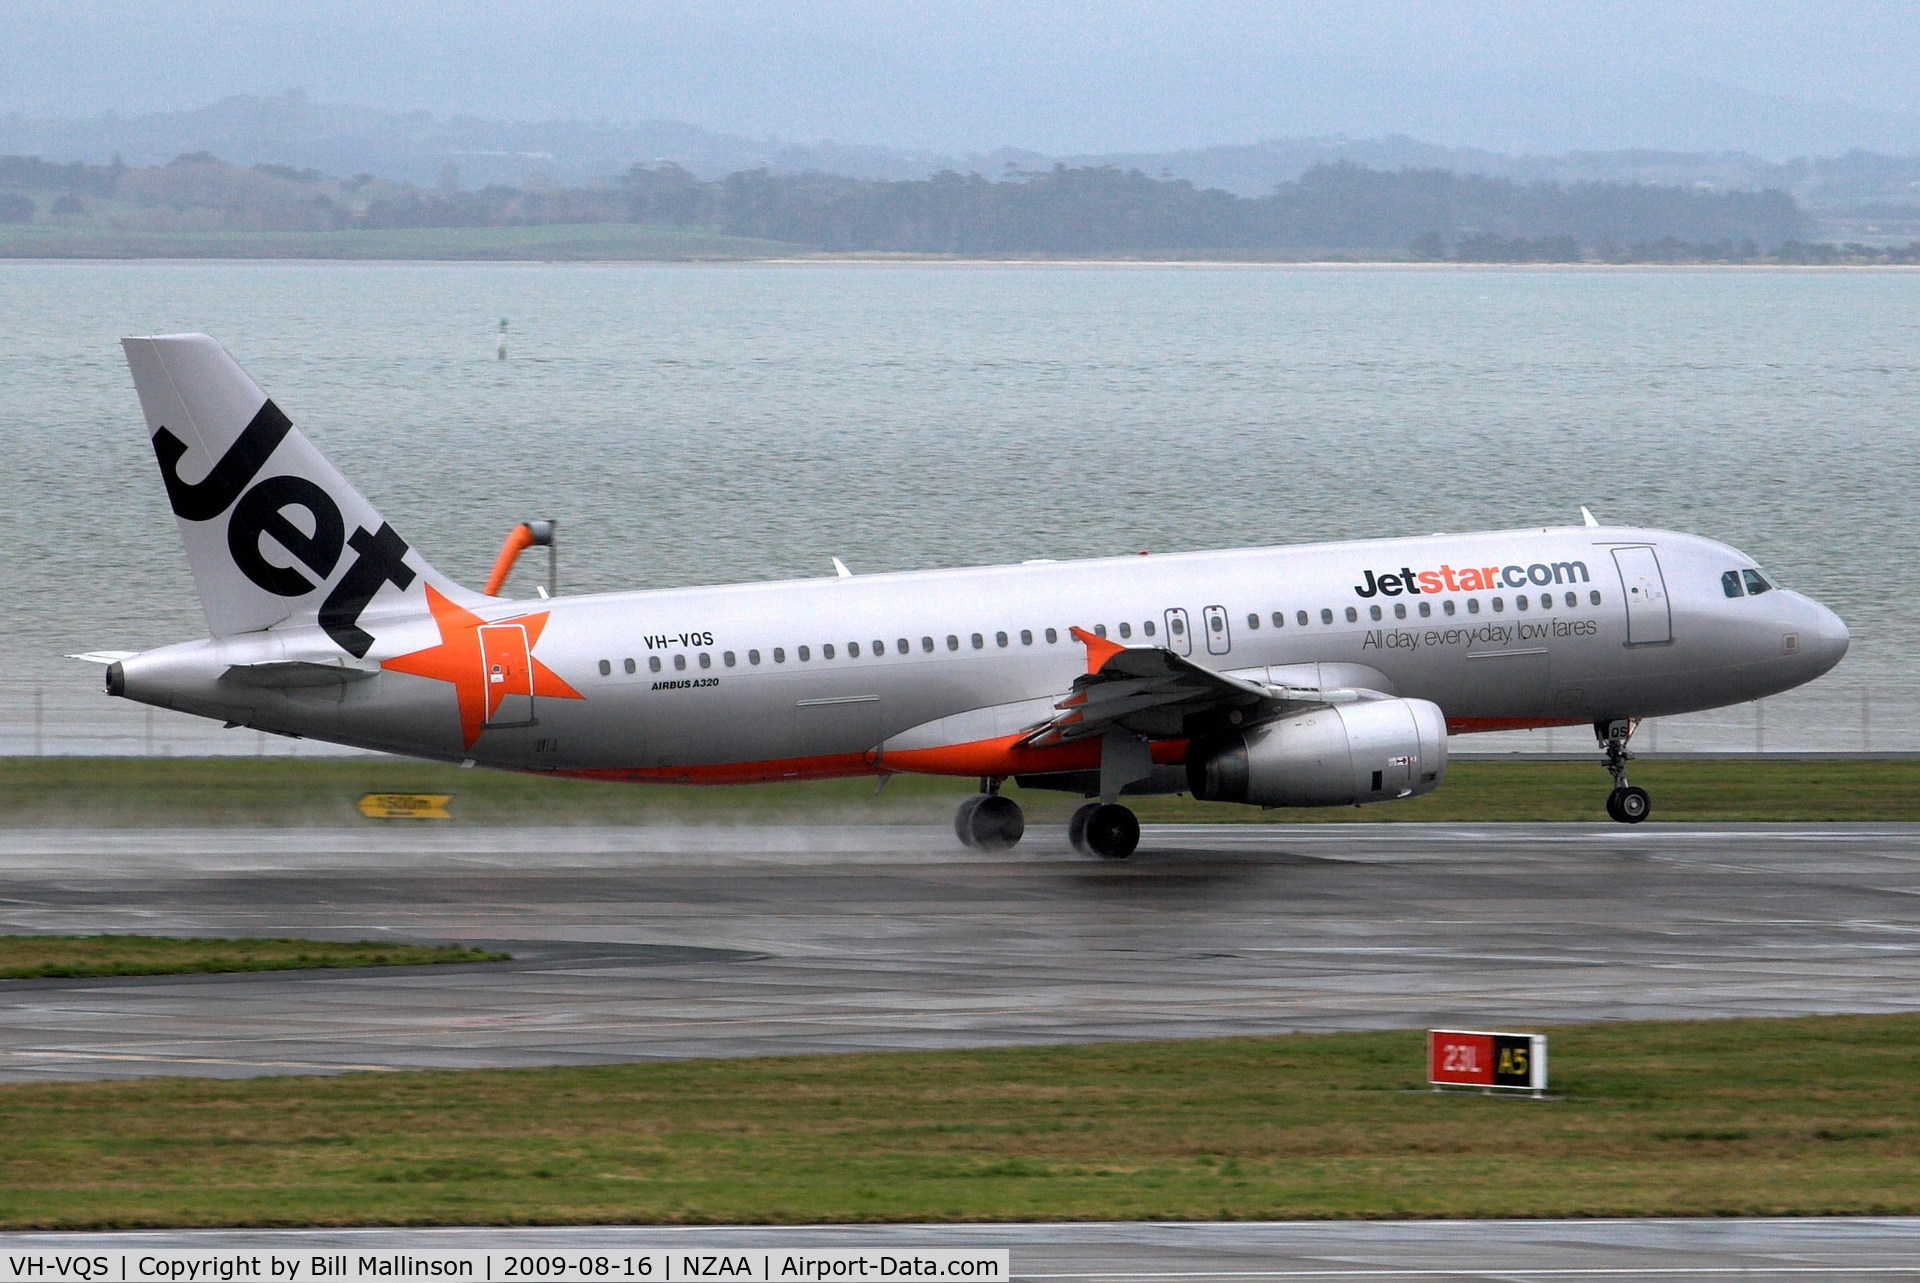 VH-VQS, 2005 Airbus A320-232 C/N 2515, Damn the Auckland weather!